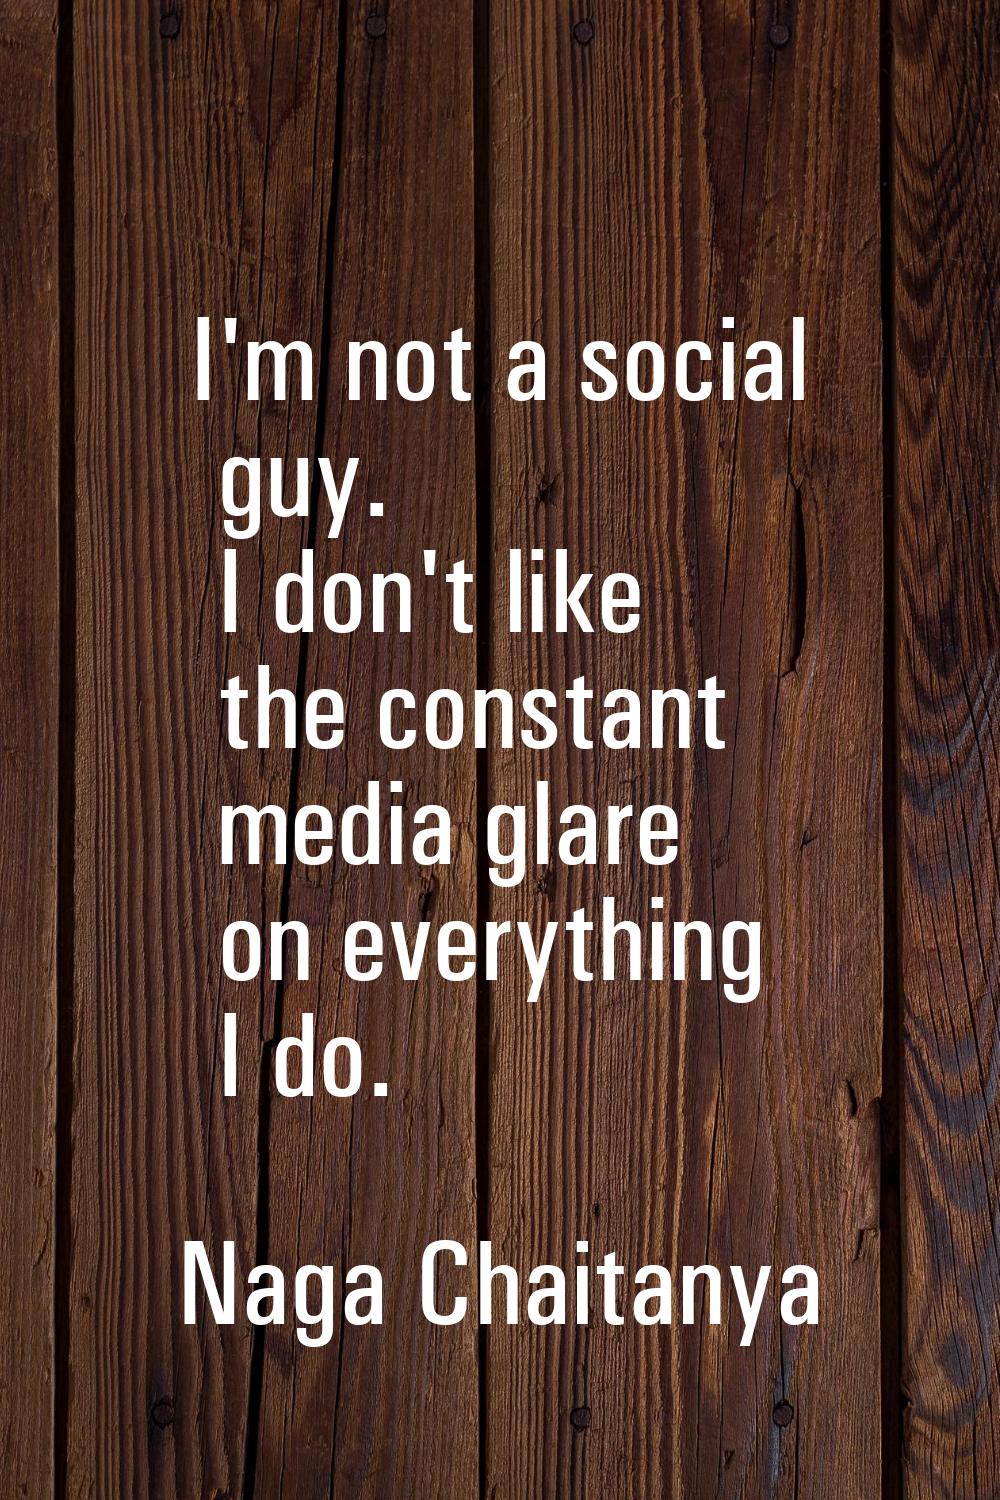 I'm not a social guy. I don't like the constant media glare on everything I do.